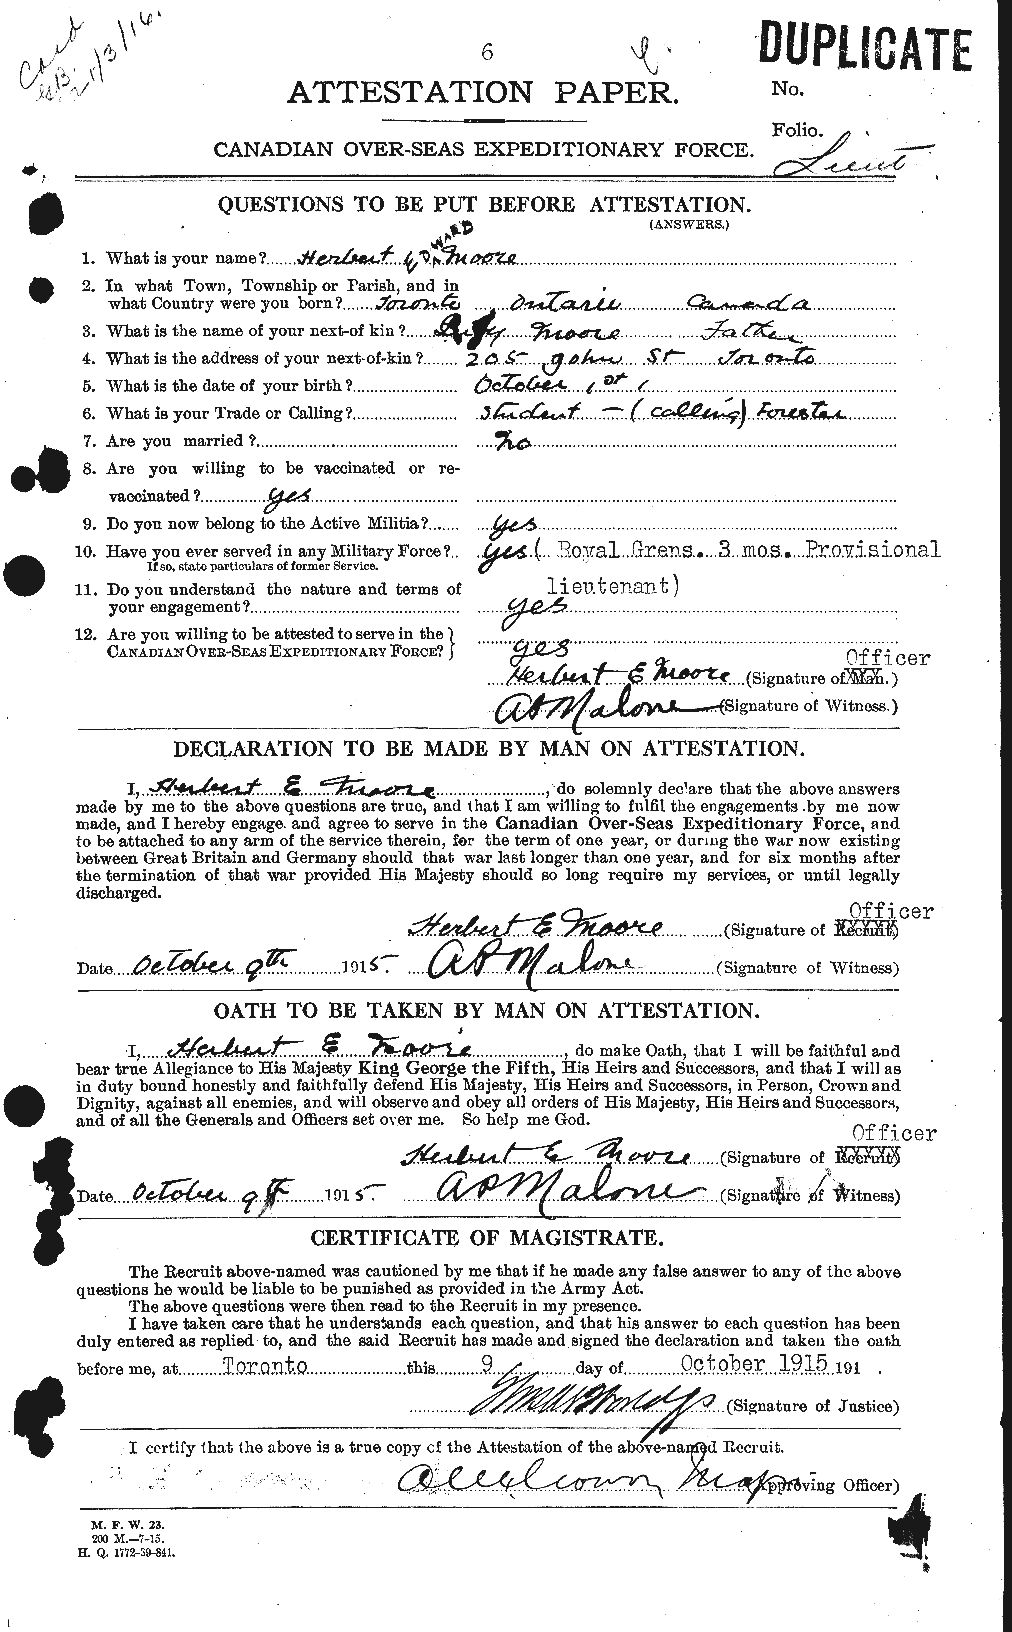 Personnel Records of the First World War - CEF 502115a